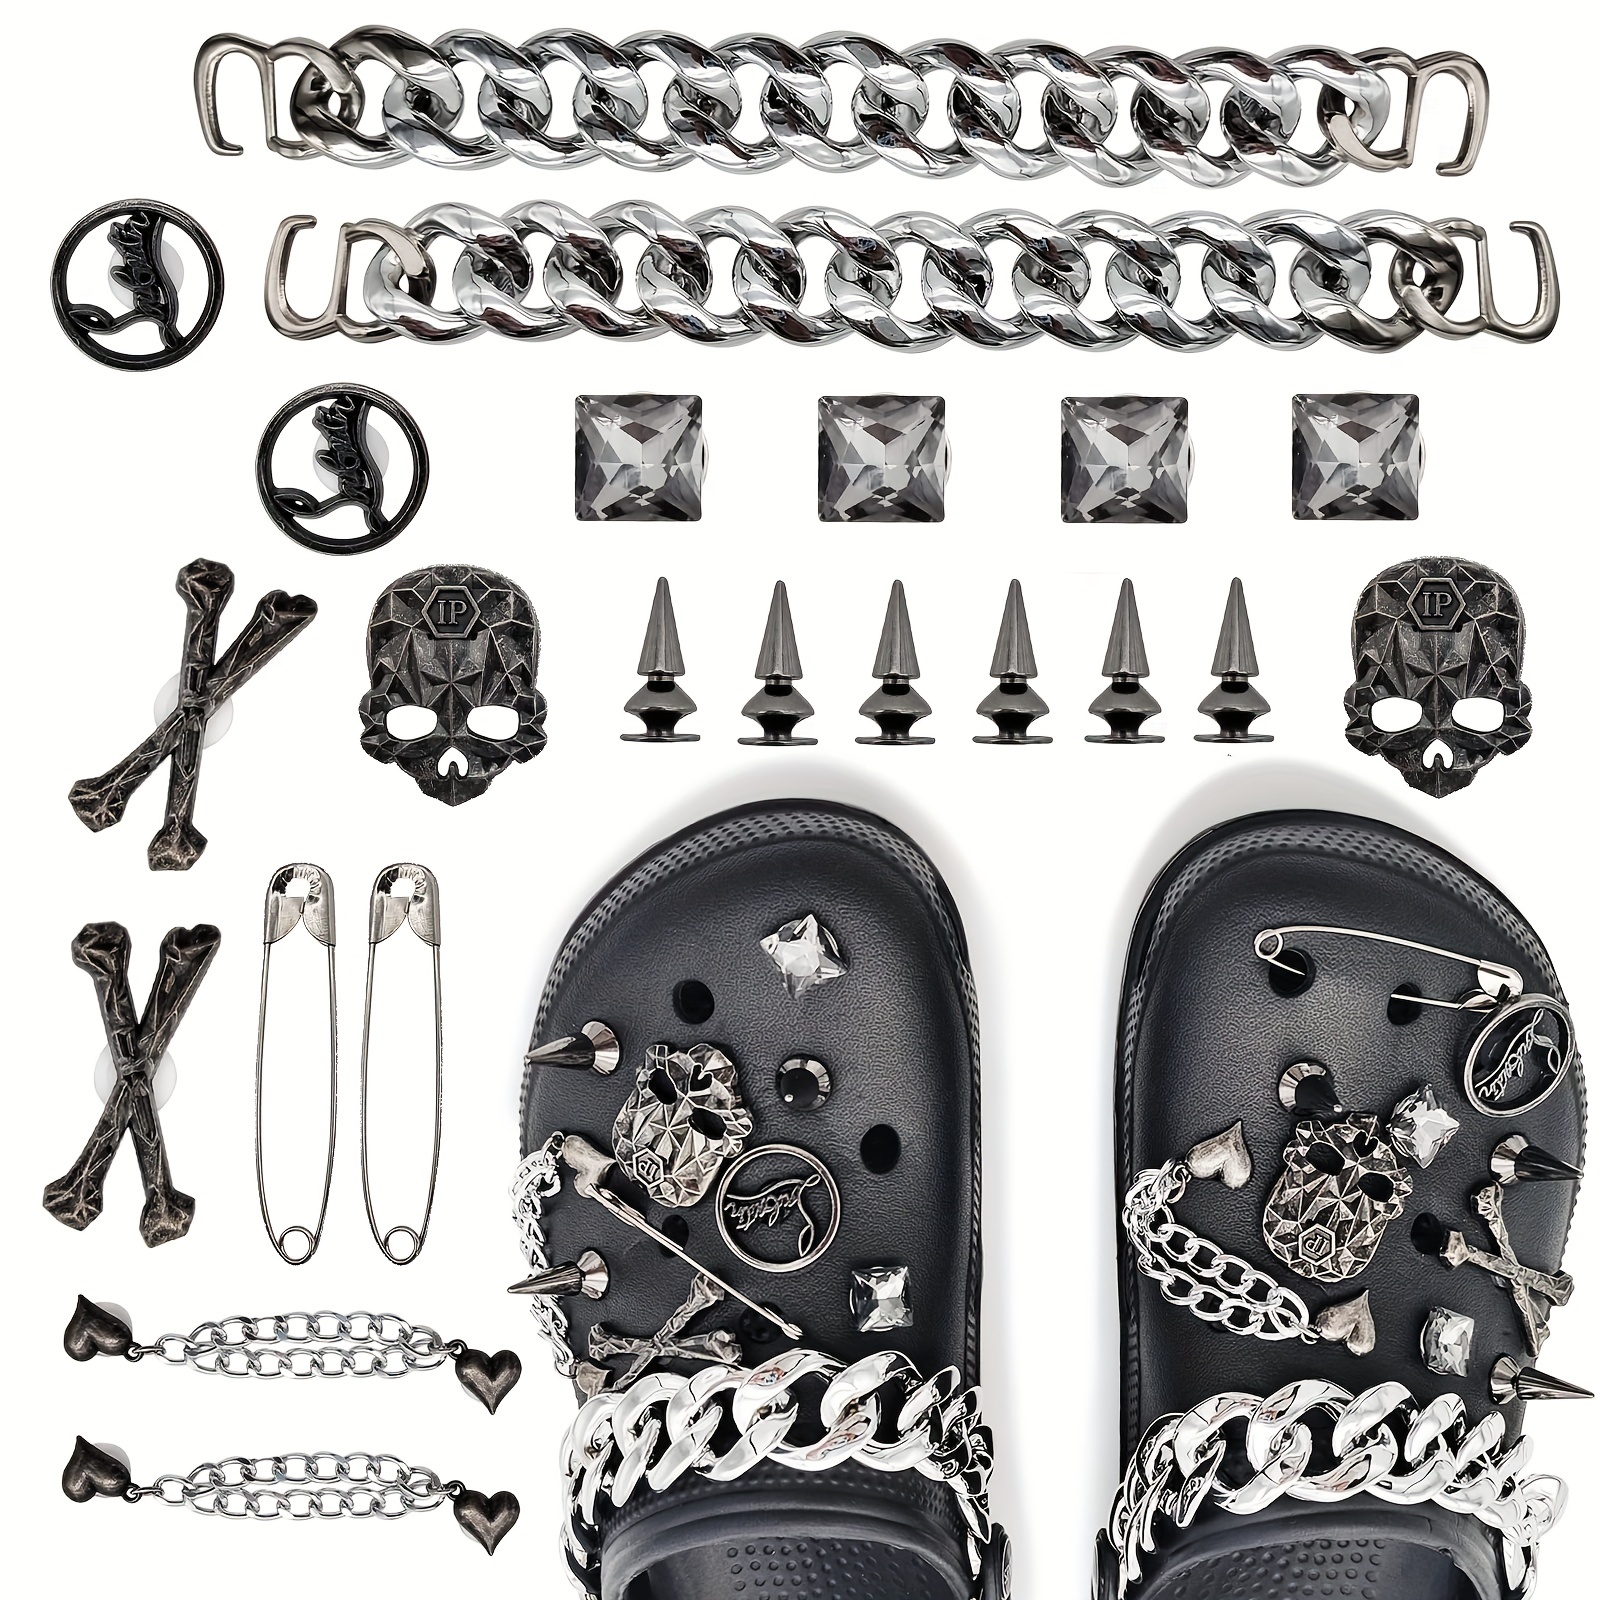 1Pcs DIY Shoe Charms Cartoon Letter Croc Charms Adult Kids Sandals Pins  Shoe Decoration jibz Cros Accessories Free shipping